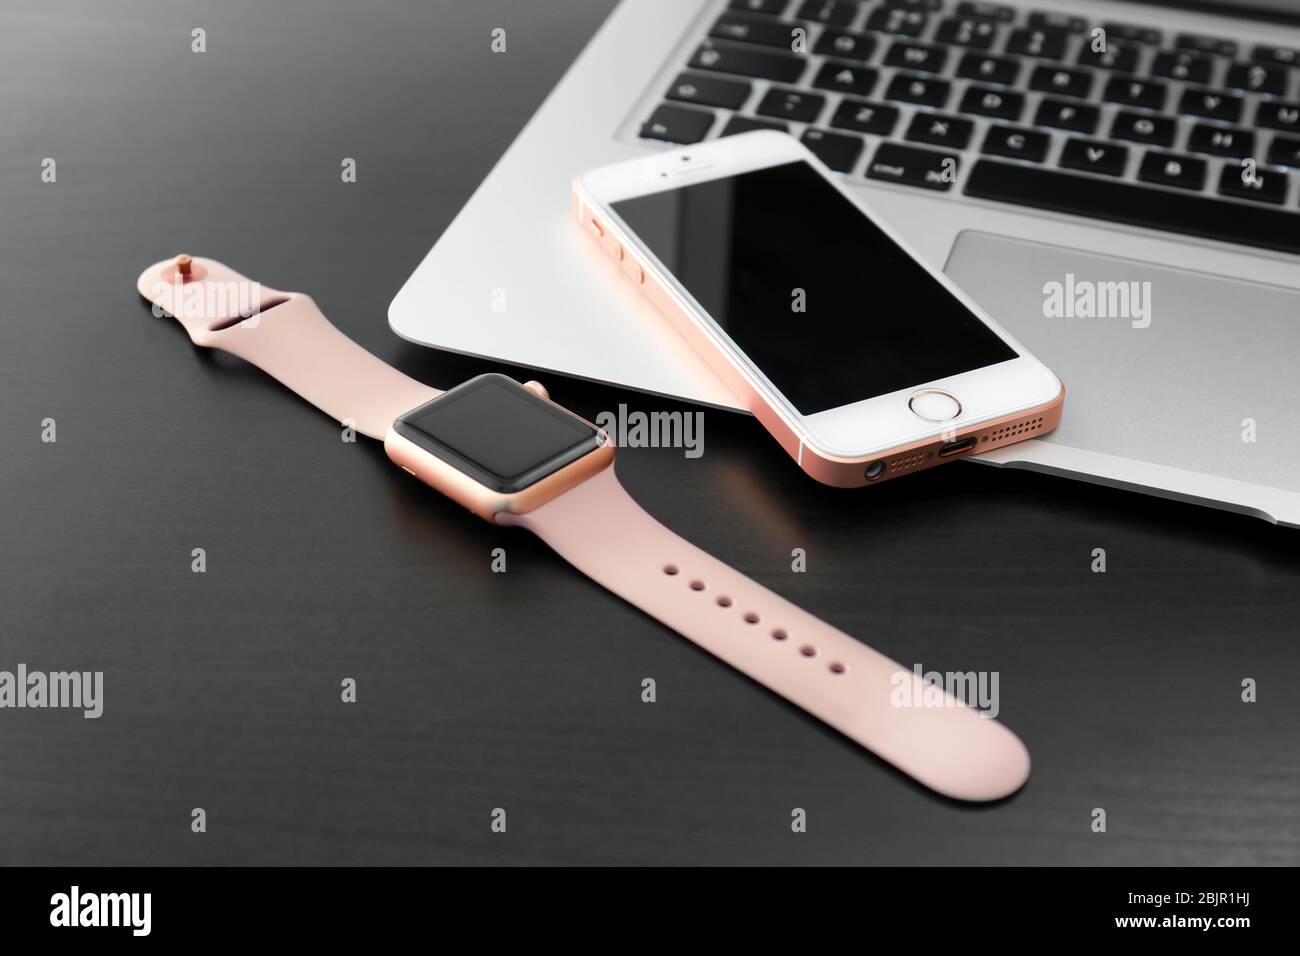 KIEV, UKRAINE - OCTOBER 17, 2017: Rose Gold iPhone SE, MacBook and Apple Watch on table Stock Photo